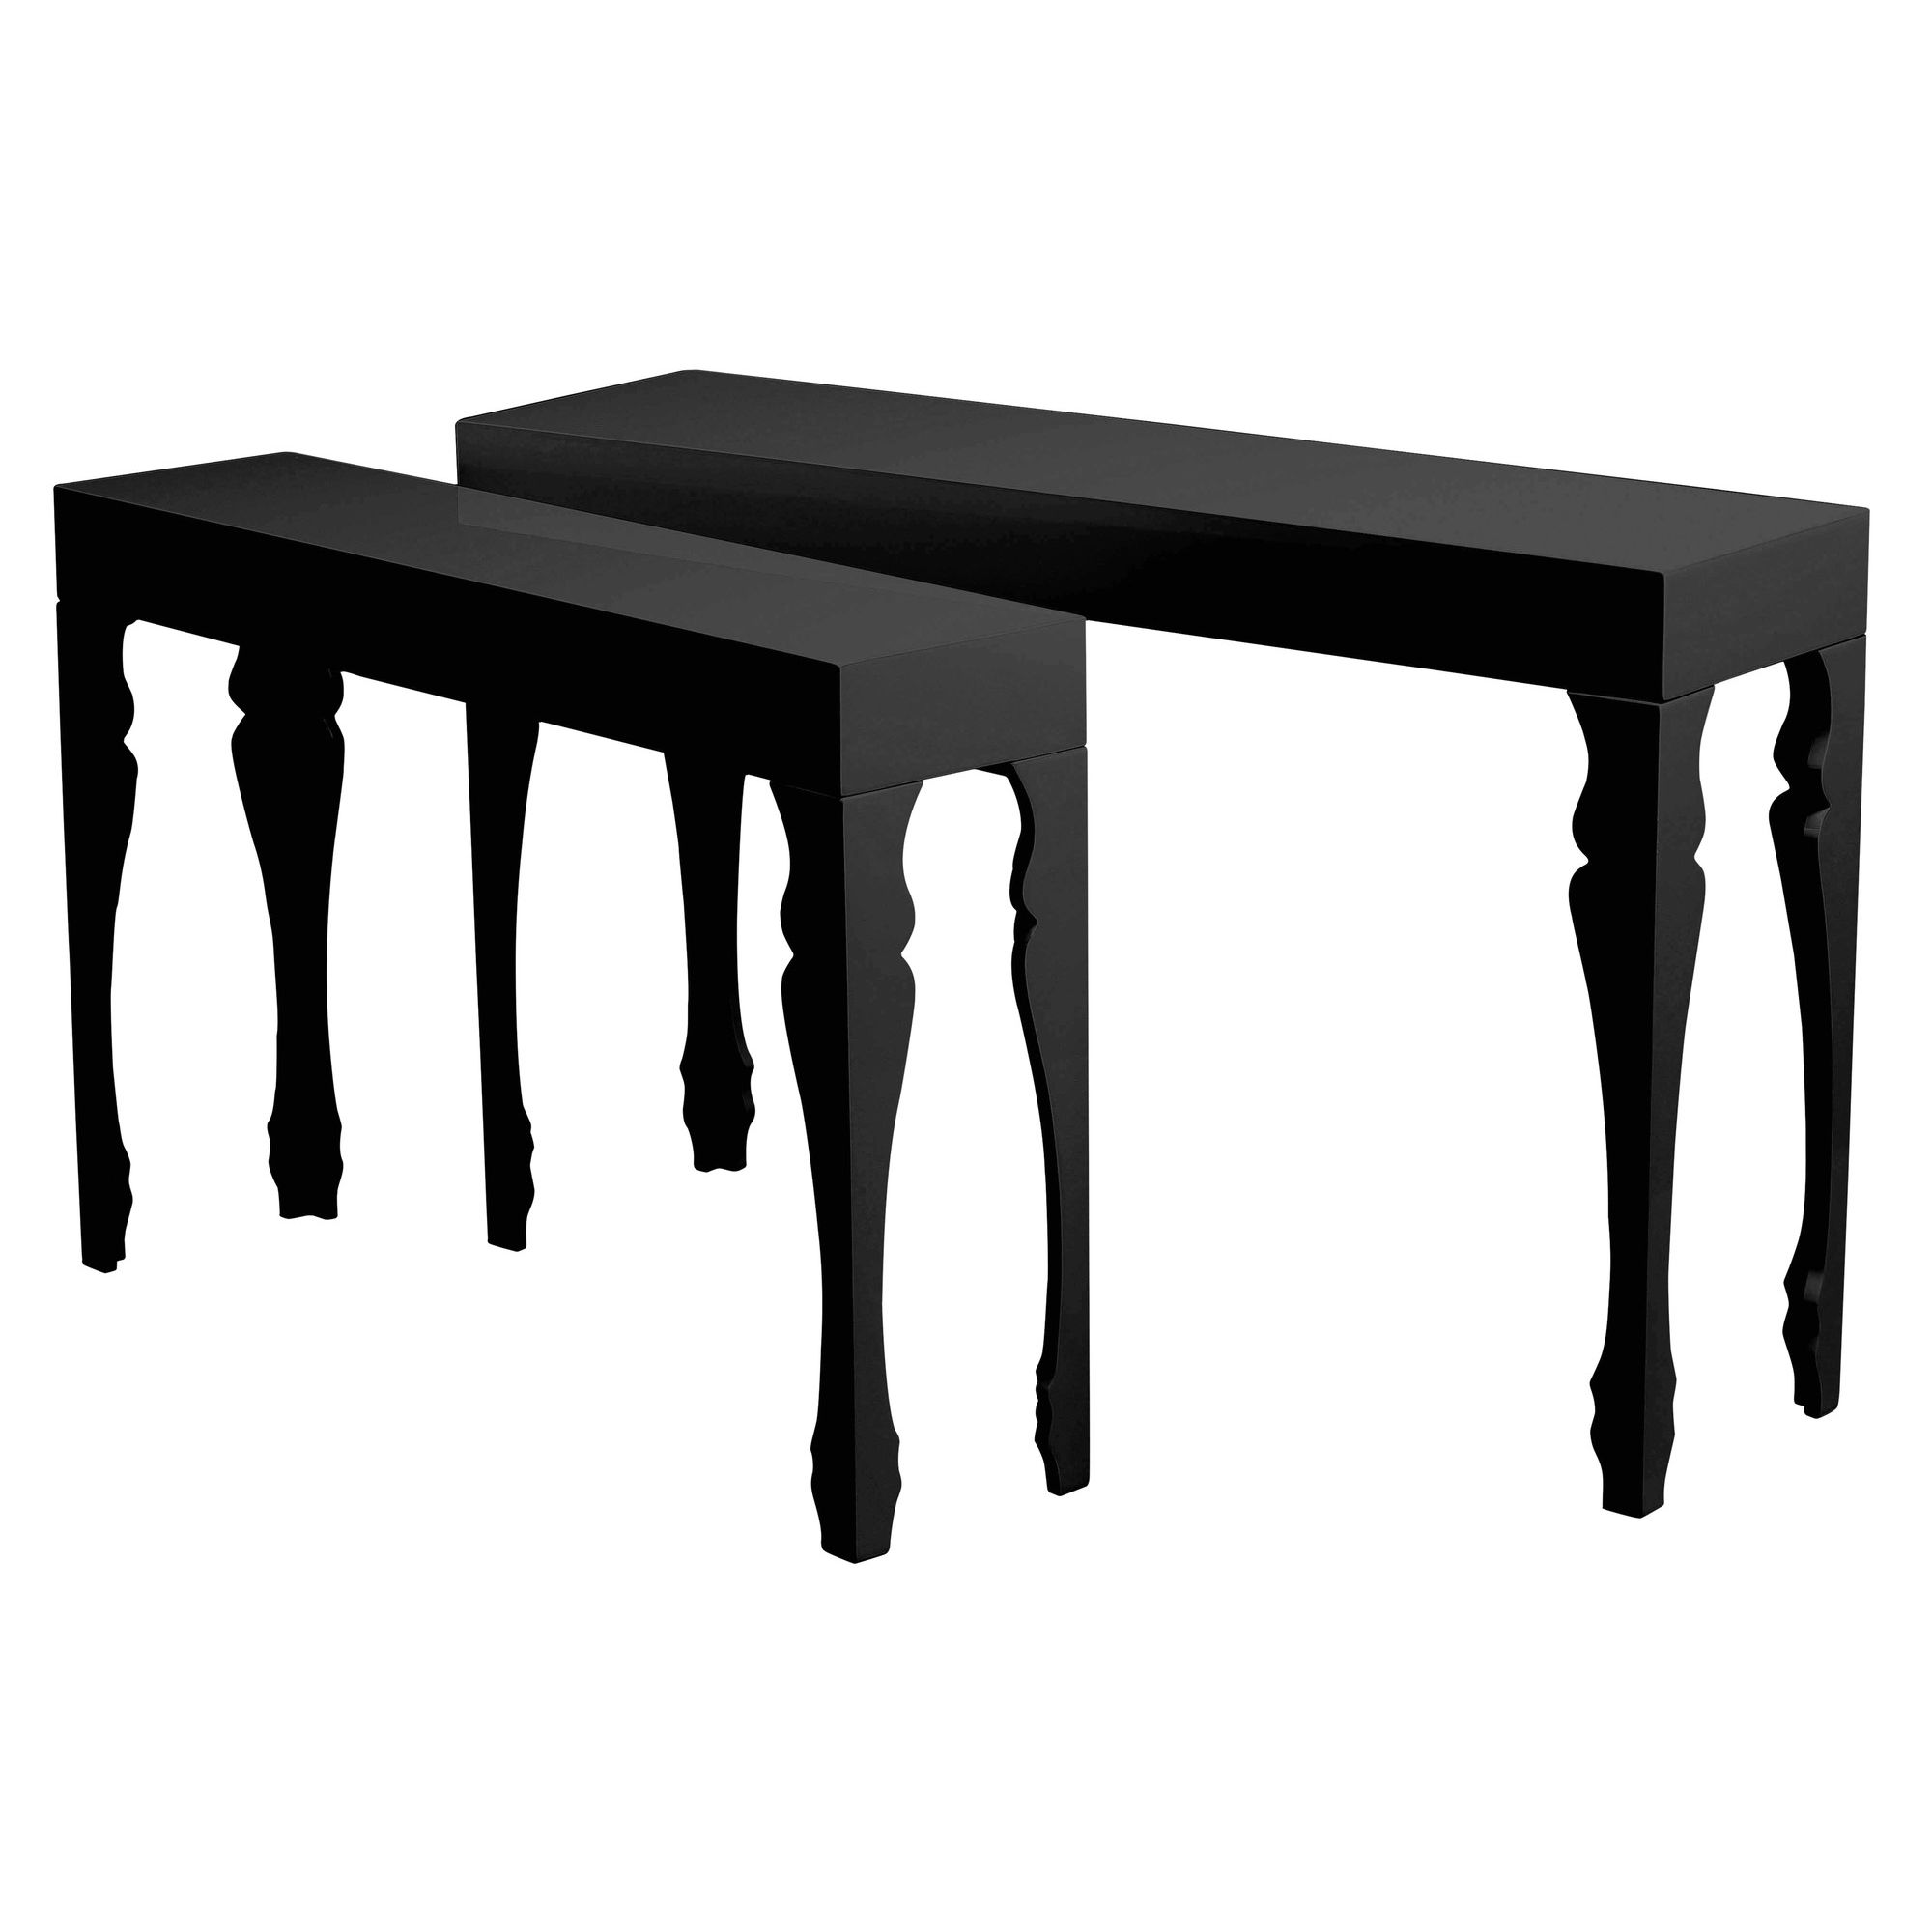 Premier Housewares Luis Accent Tables (Set of 2) - Black High Gloss at Tesco Direct